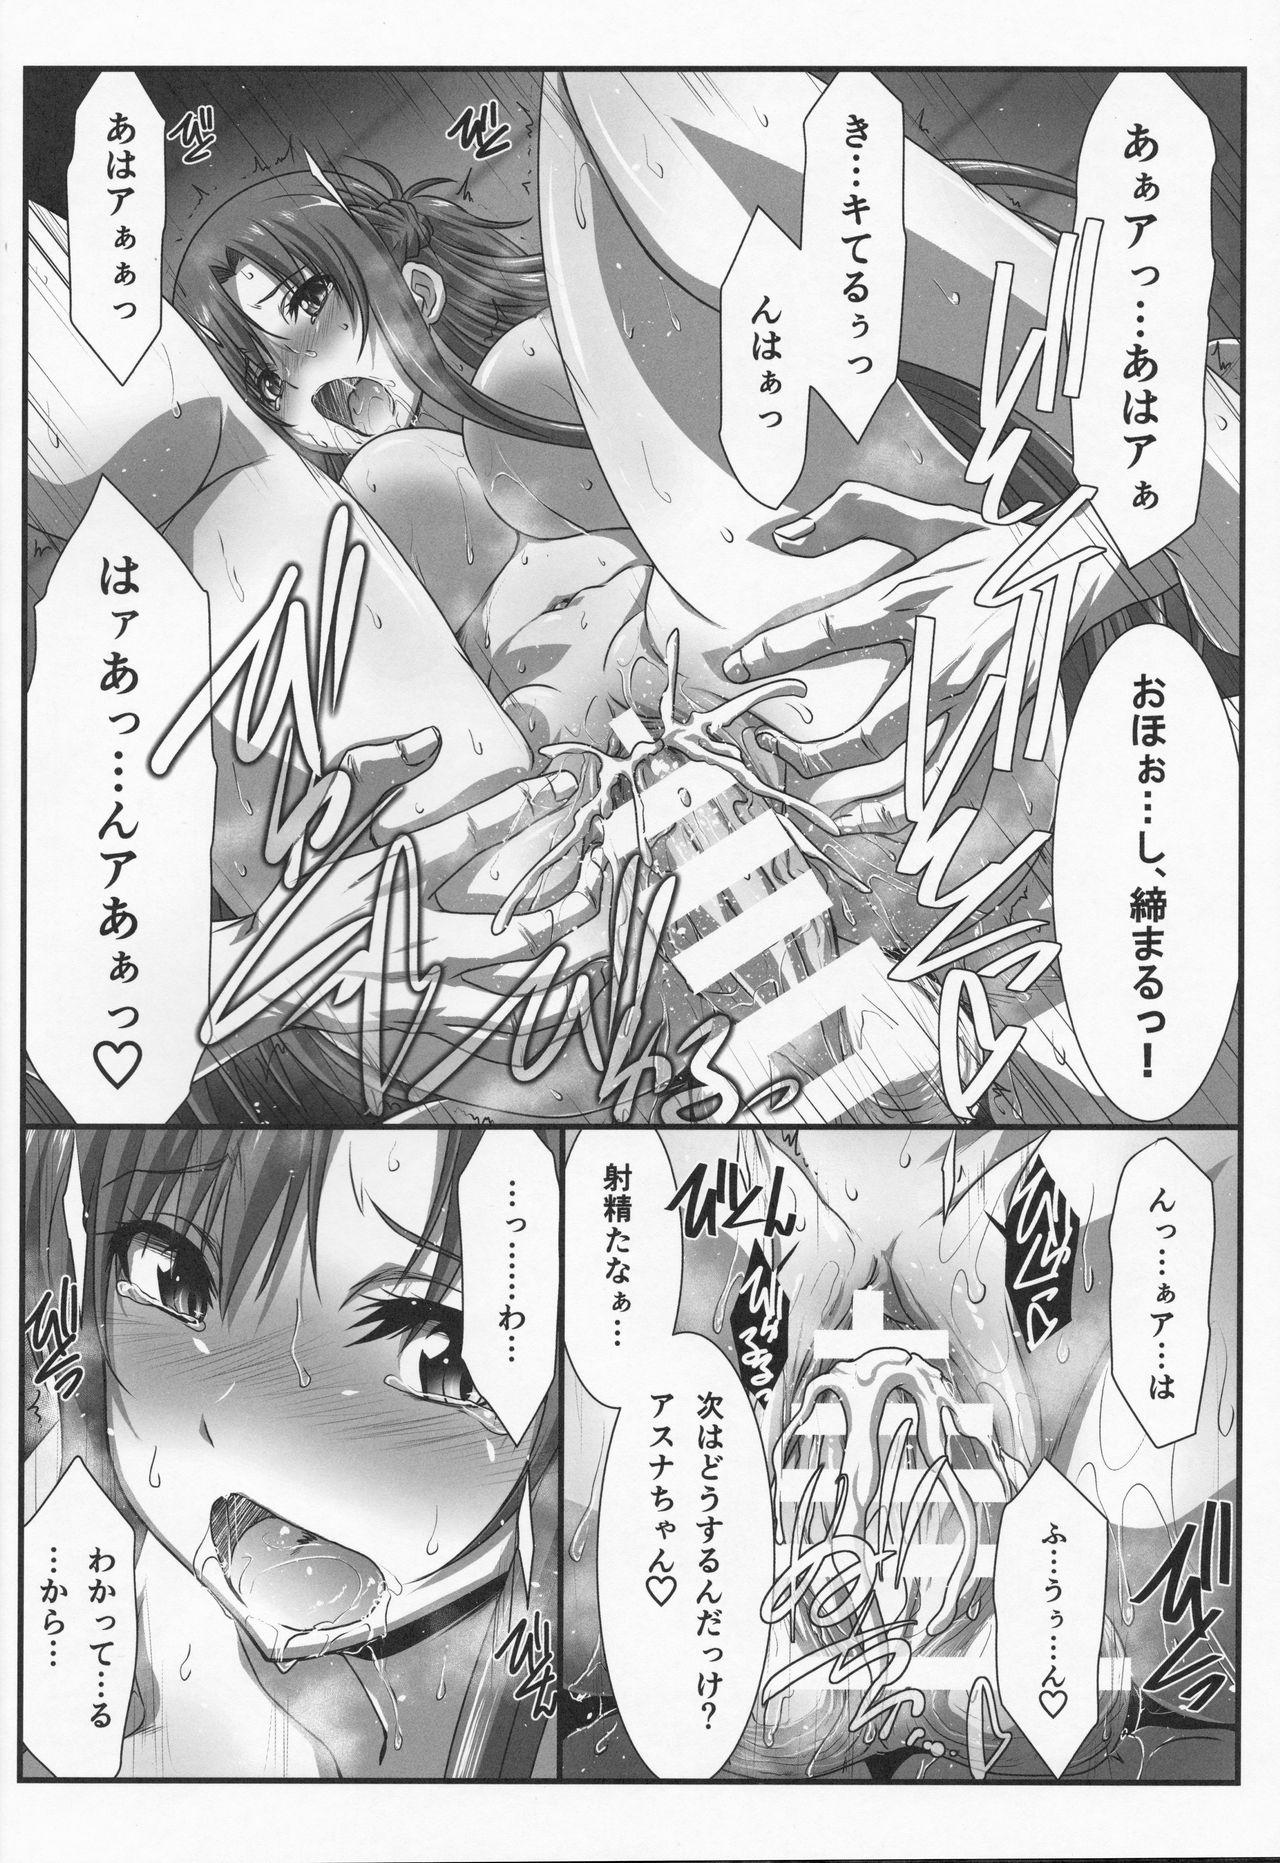 Doggystyle Porn Astral Bout Ver. 42 - Sword art online For - Page 11